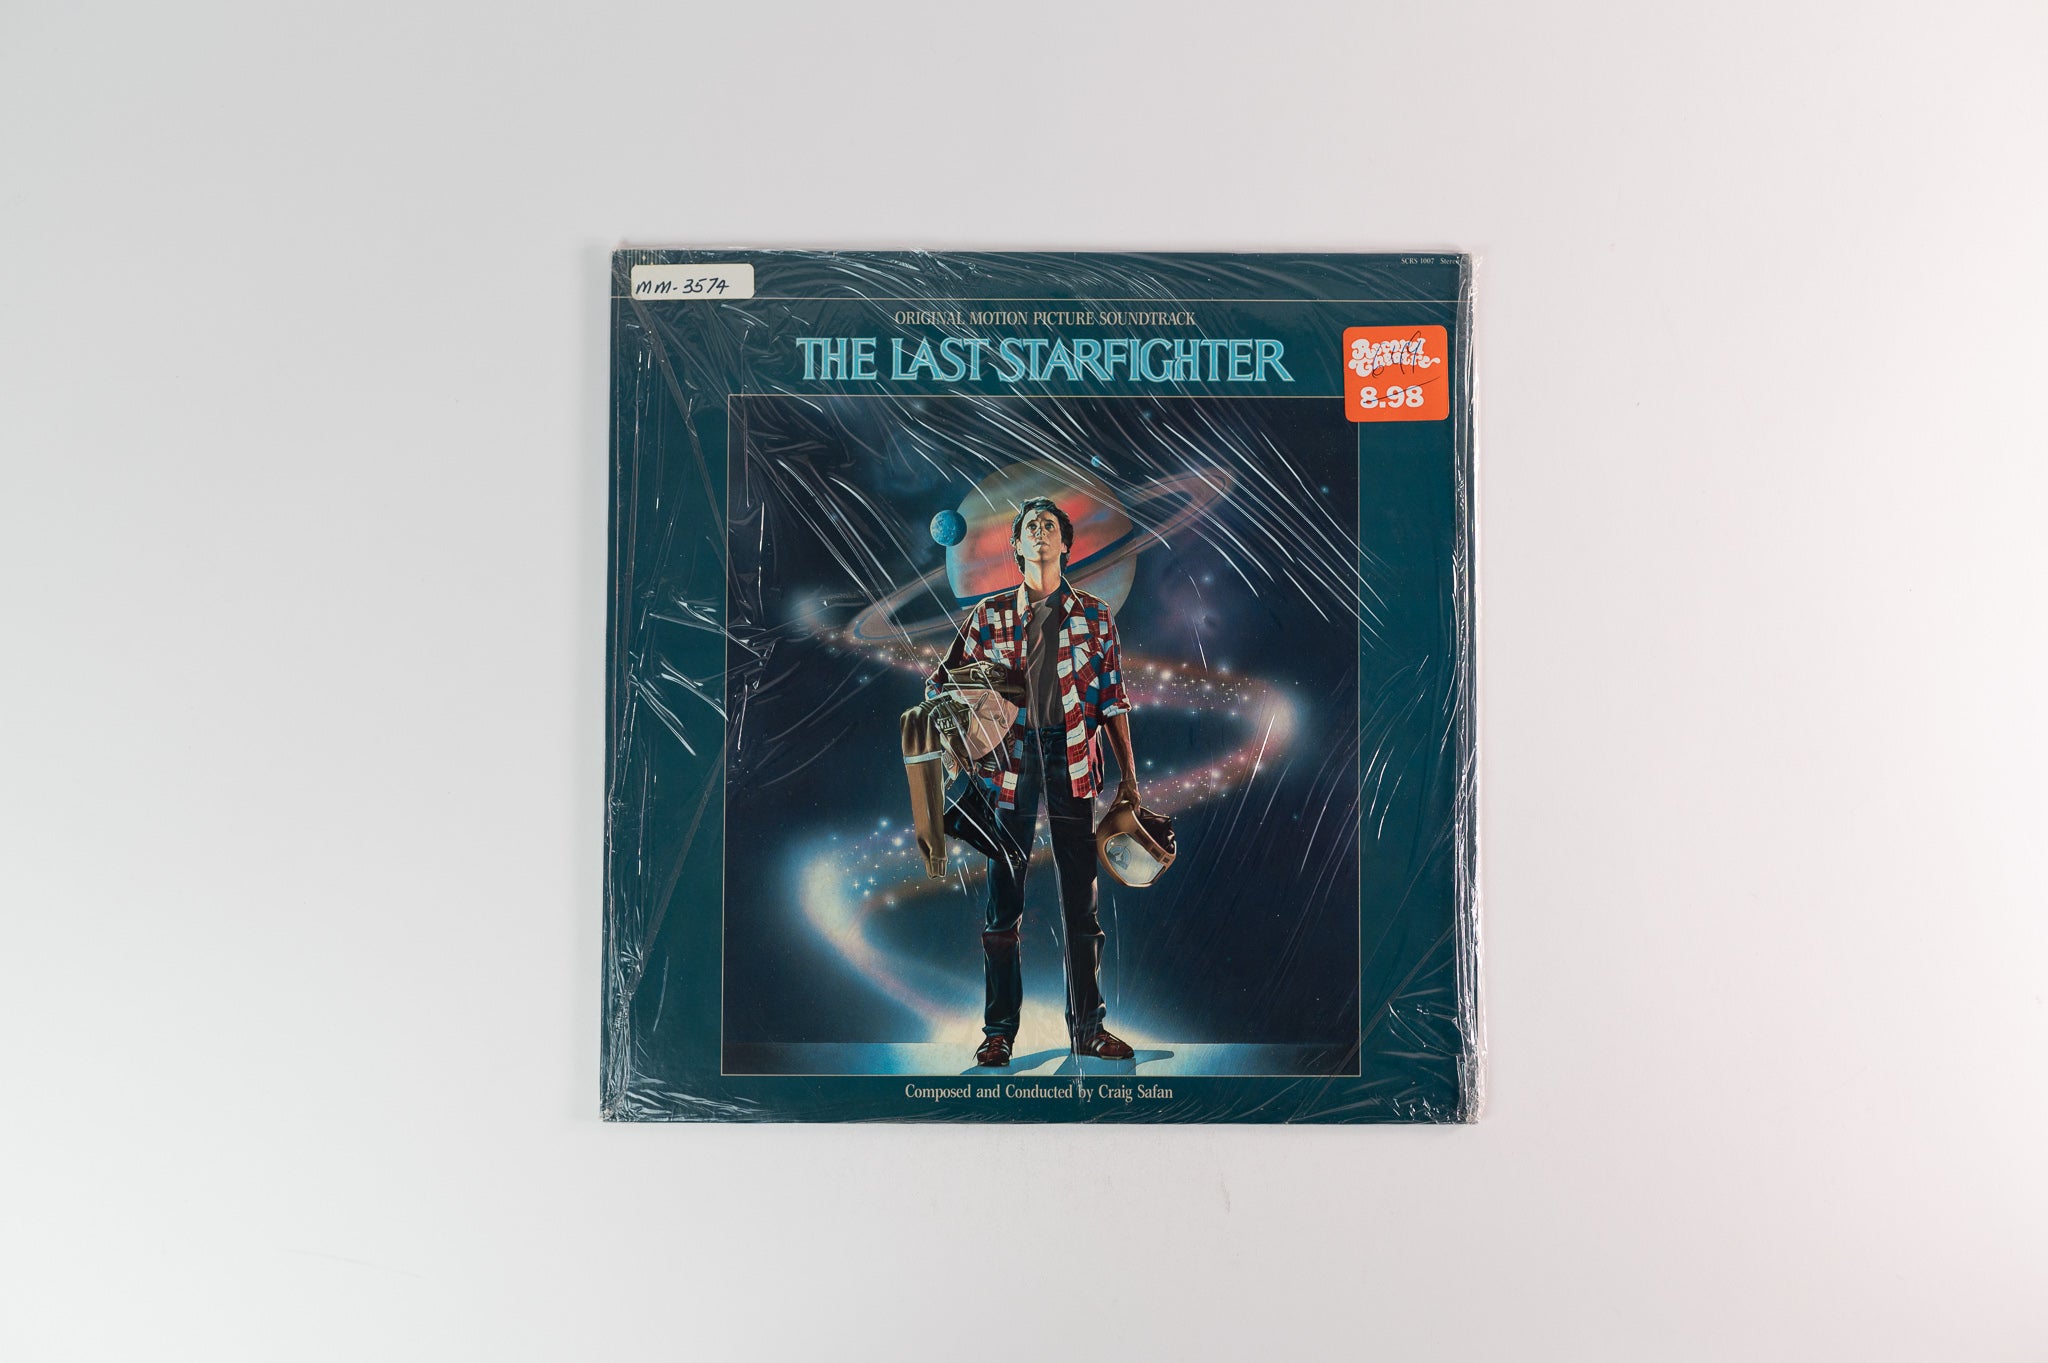 Craig Safan - The Last Starfighter (Original Motion Picture Soundtrack) on Southern Cross Sealed